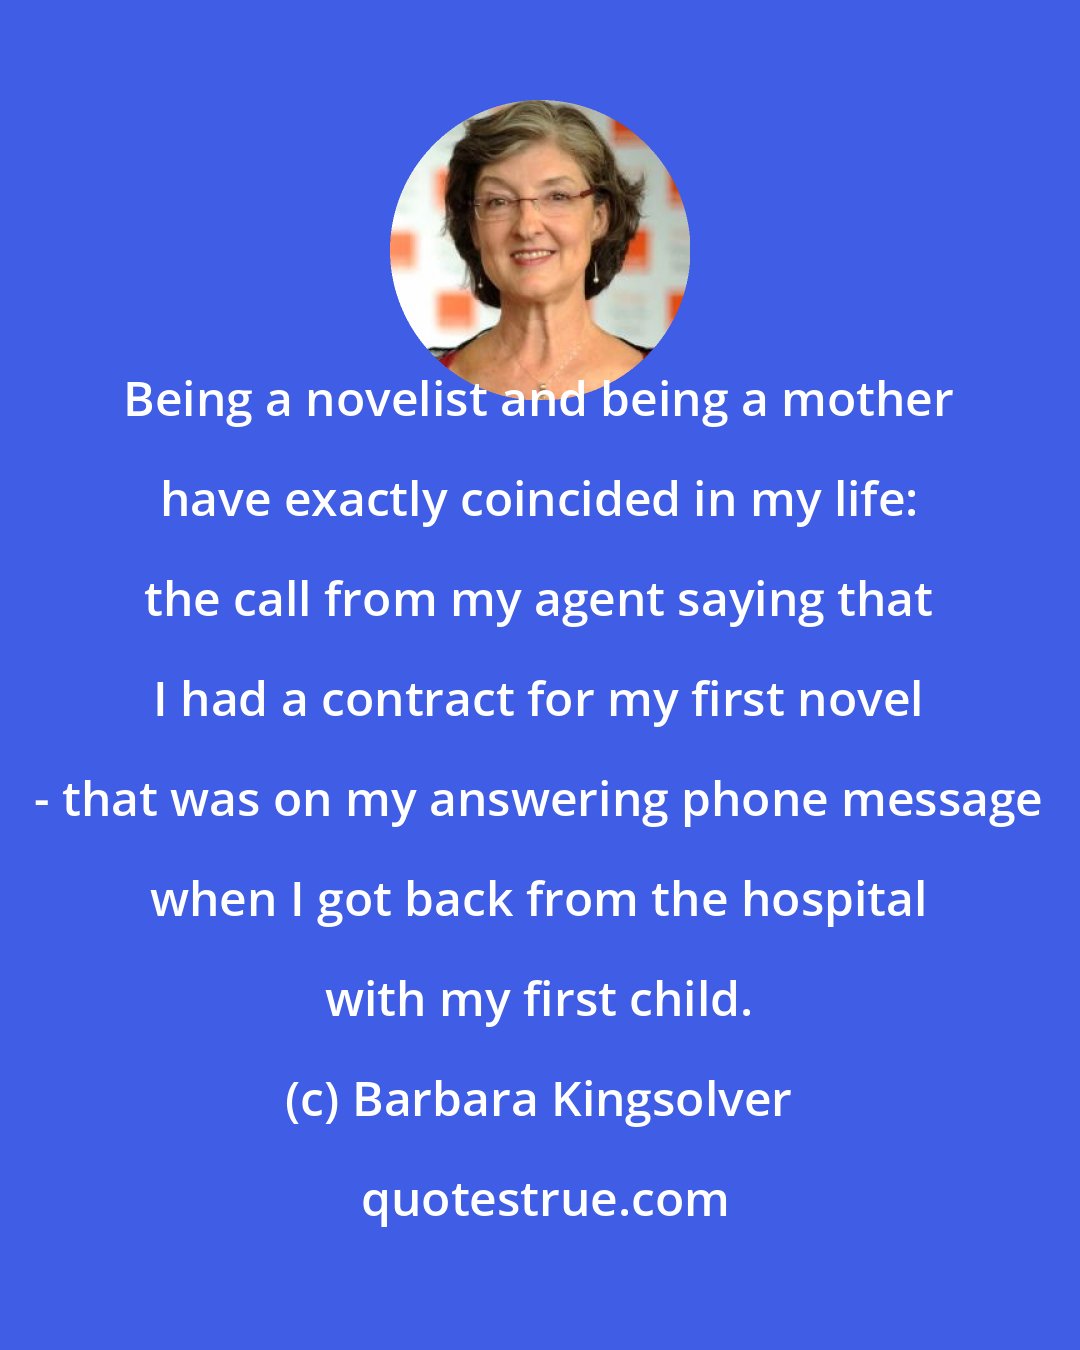 Barbara Kingsolver: Being a novelist and being a mother have exactly coincided in my life: the call from my agent saying that I had a contract for my first novel - that was on my answering phone message when I got back from the hospital with my first child.